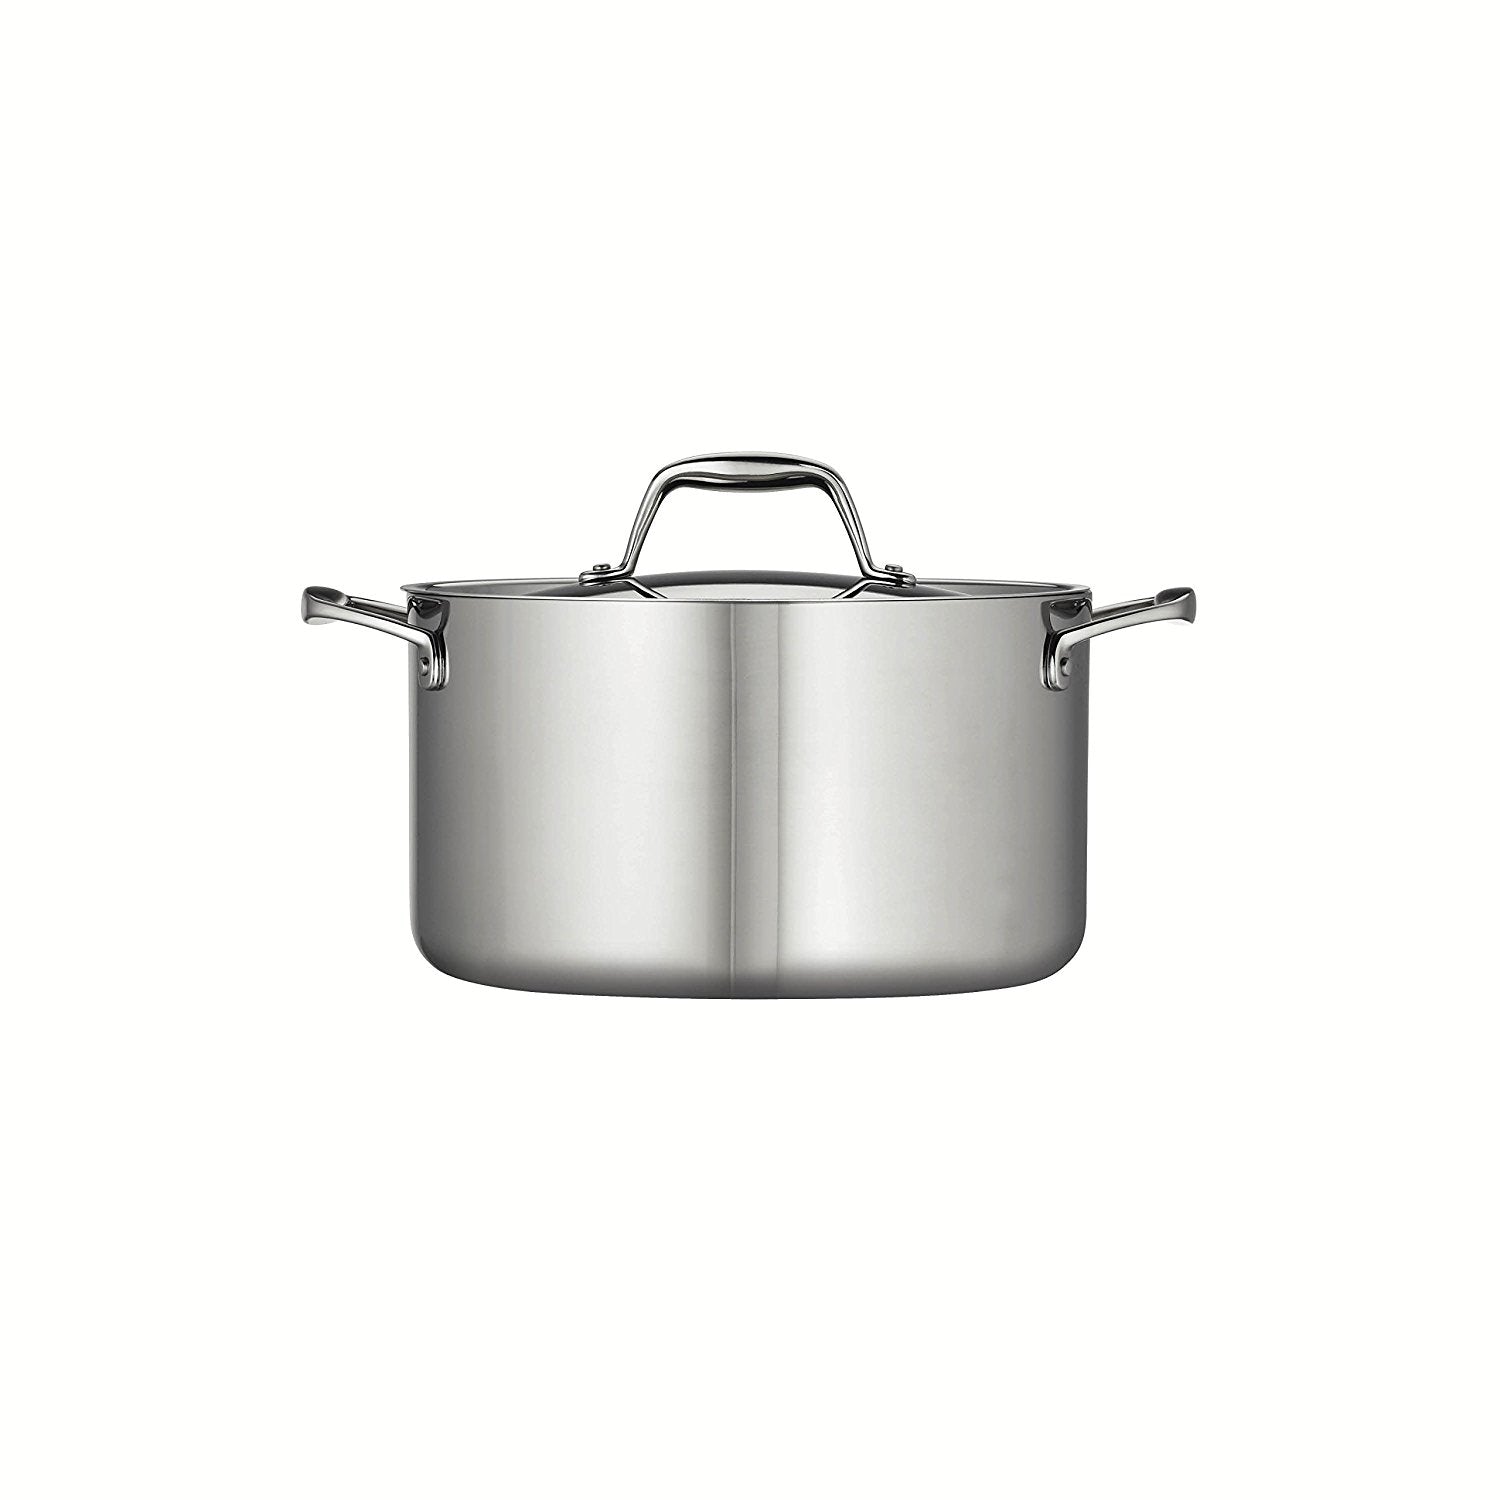 Tramontina 80116/040DS 6QT Gourmet Tri-Ply Clad Covered Sauce Pot, Stainless Steel - Induction Ready, Dishwasher Safe, Oven Safe COOKPOT